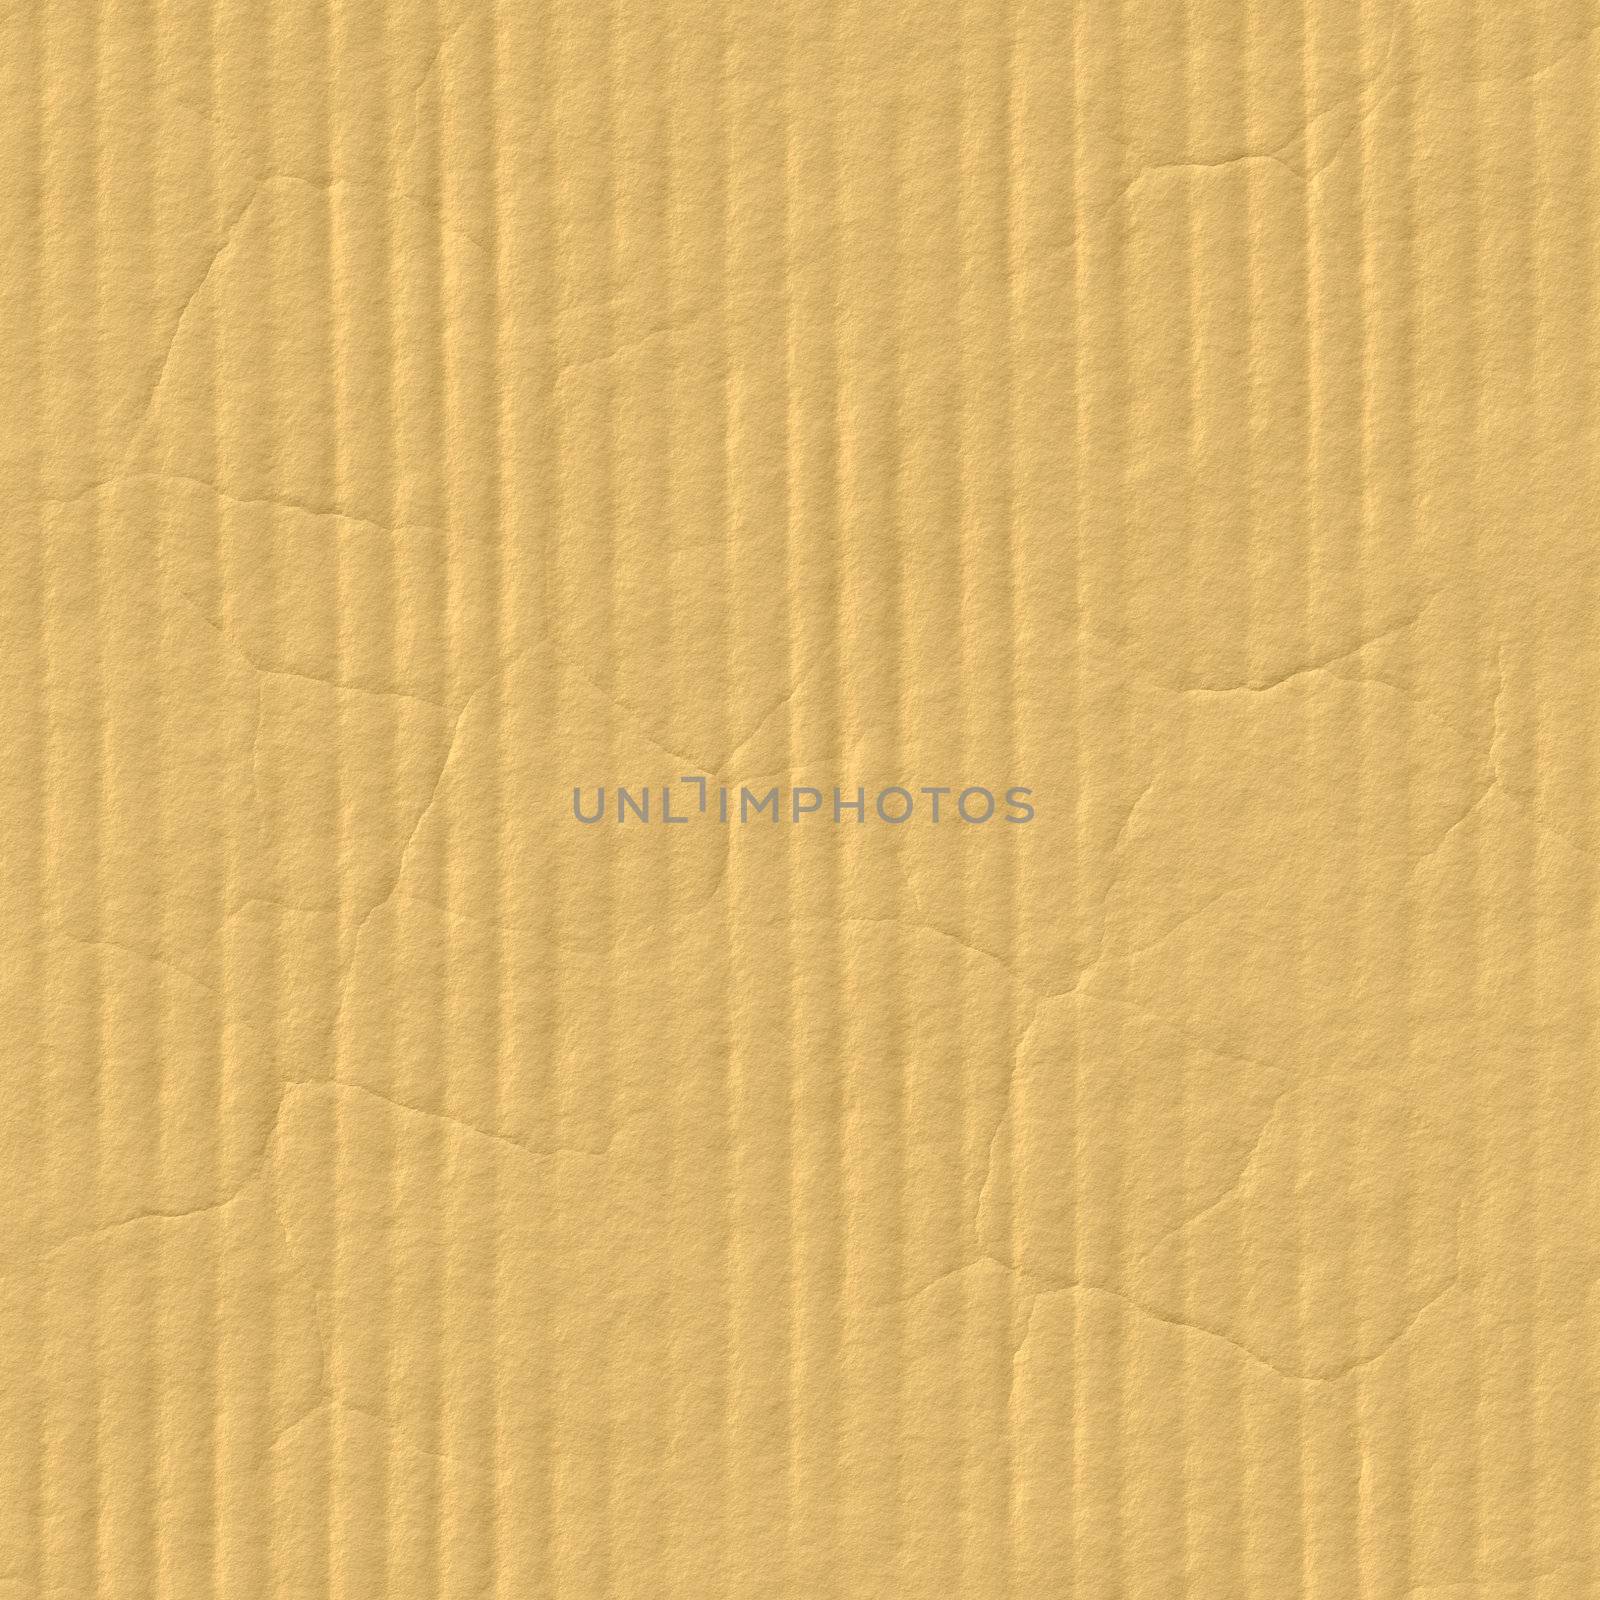 A corrugated cardboard texture with creases and wrinkles in certain spots.